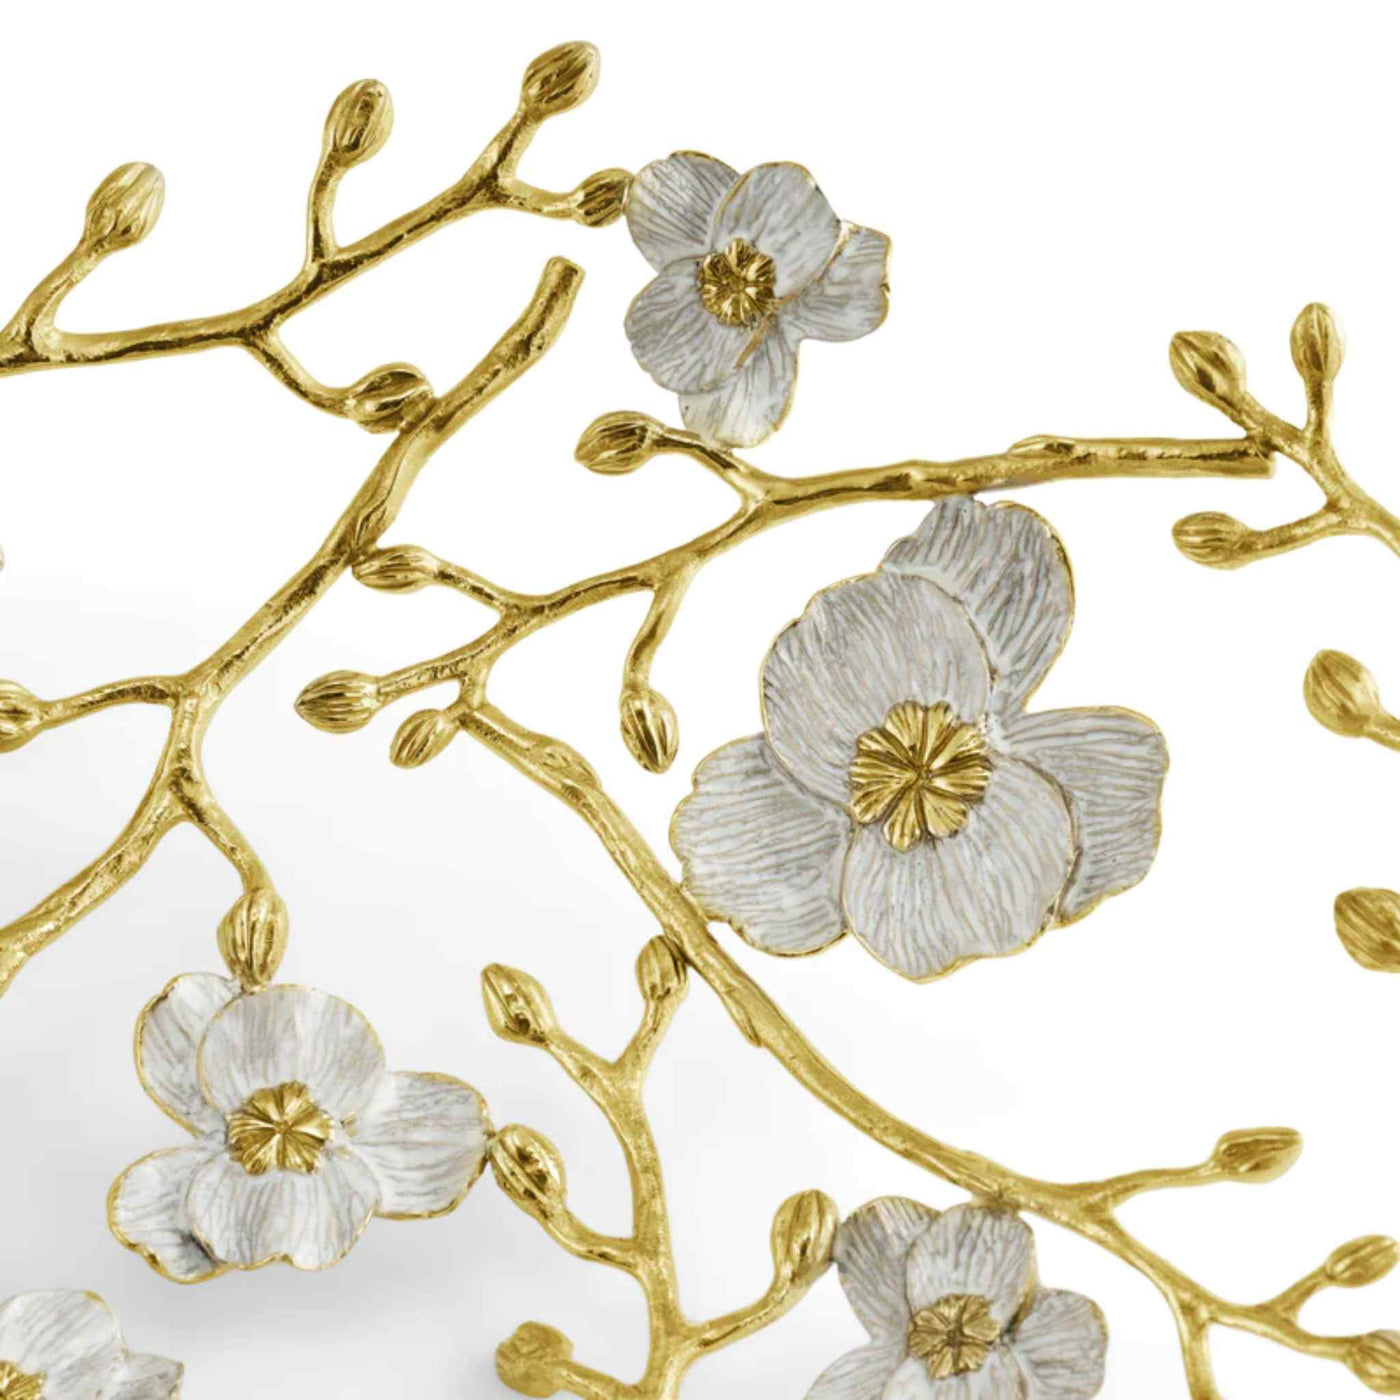 Michael Aram Orchid Basket in Natural Brass and White Enamel close up on detail